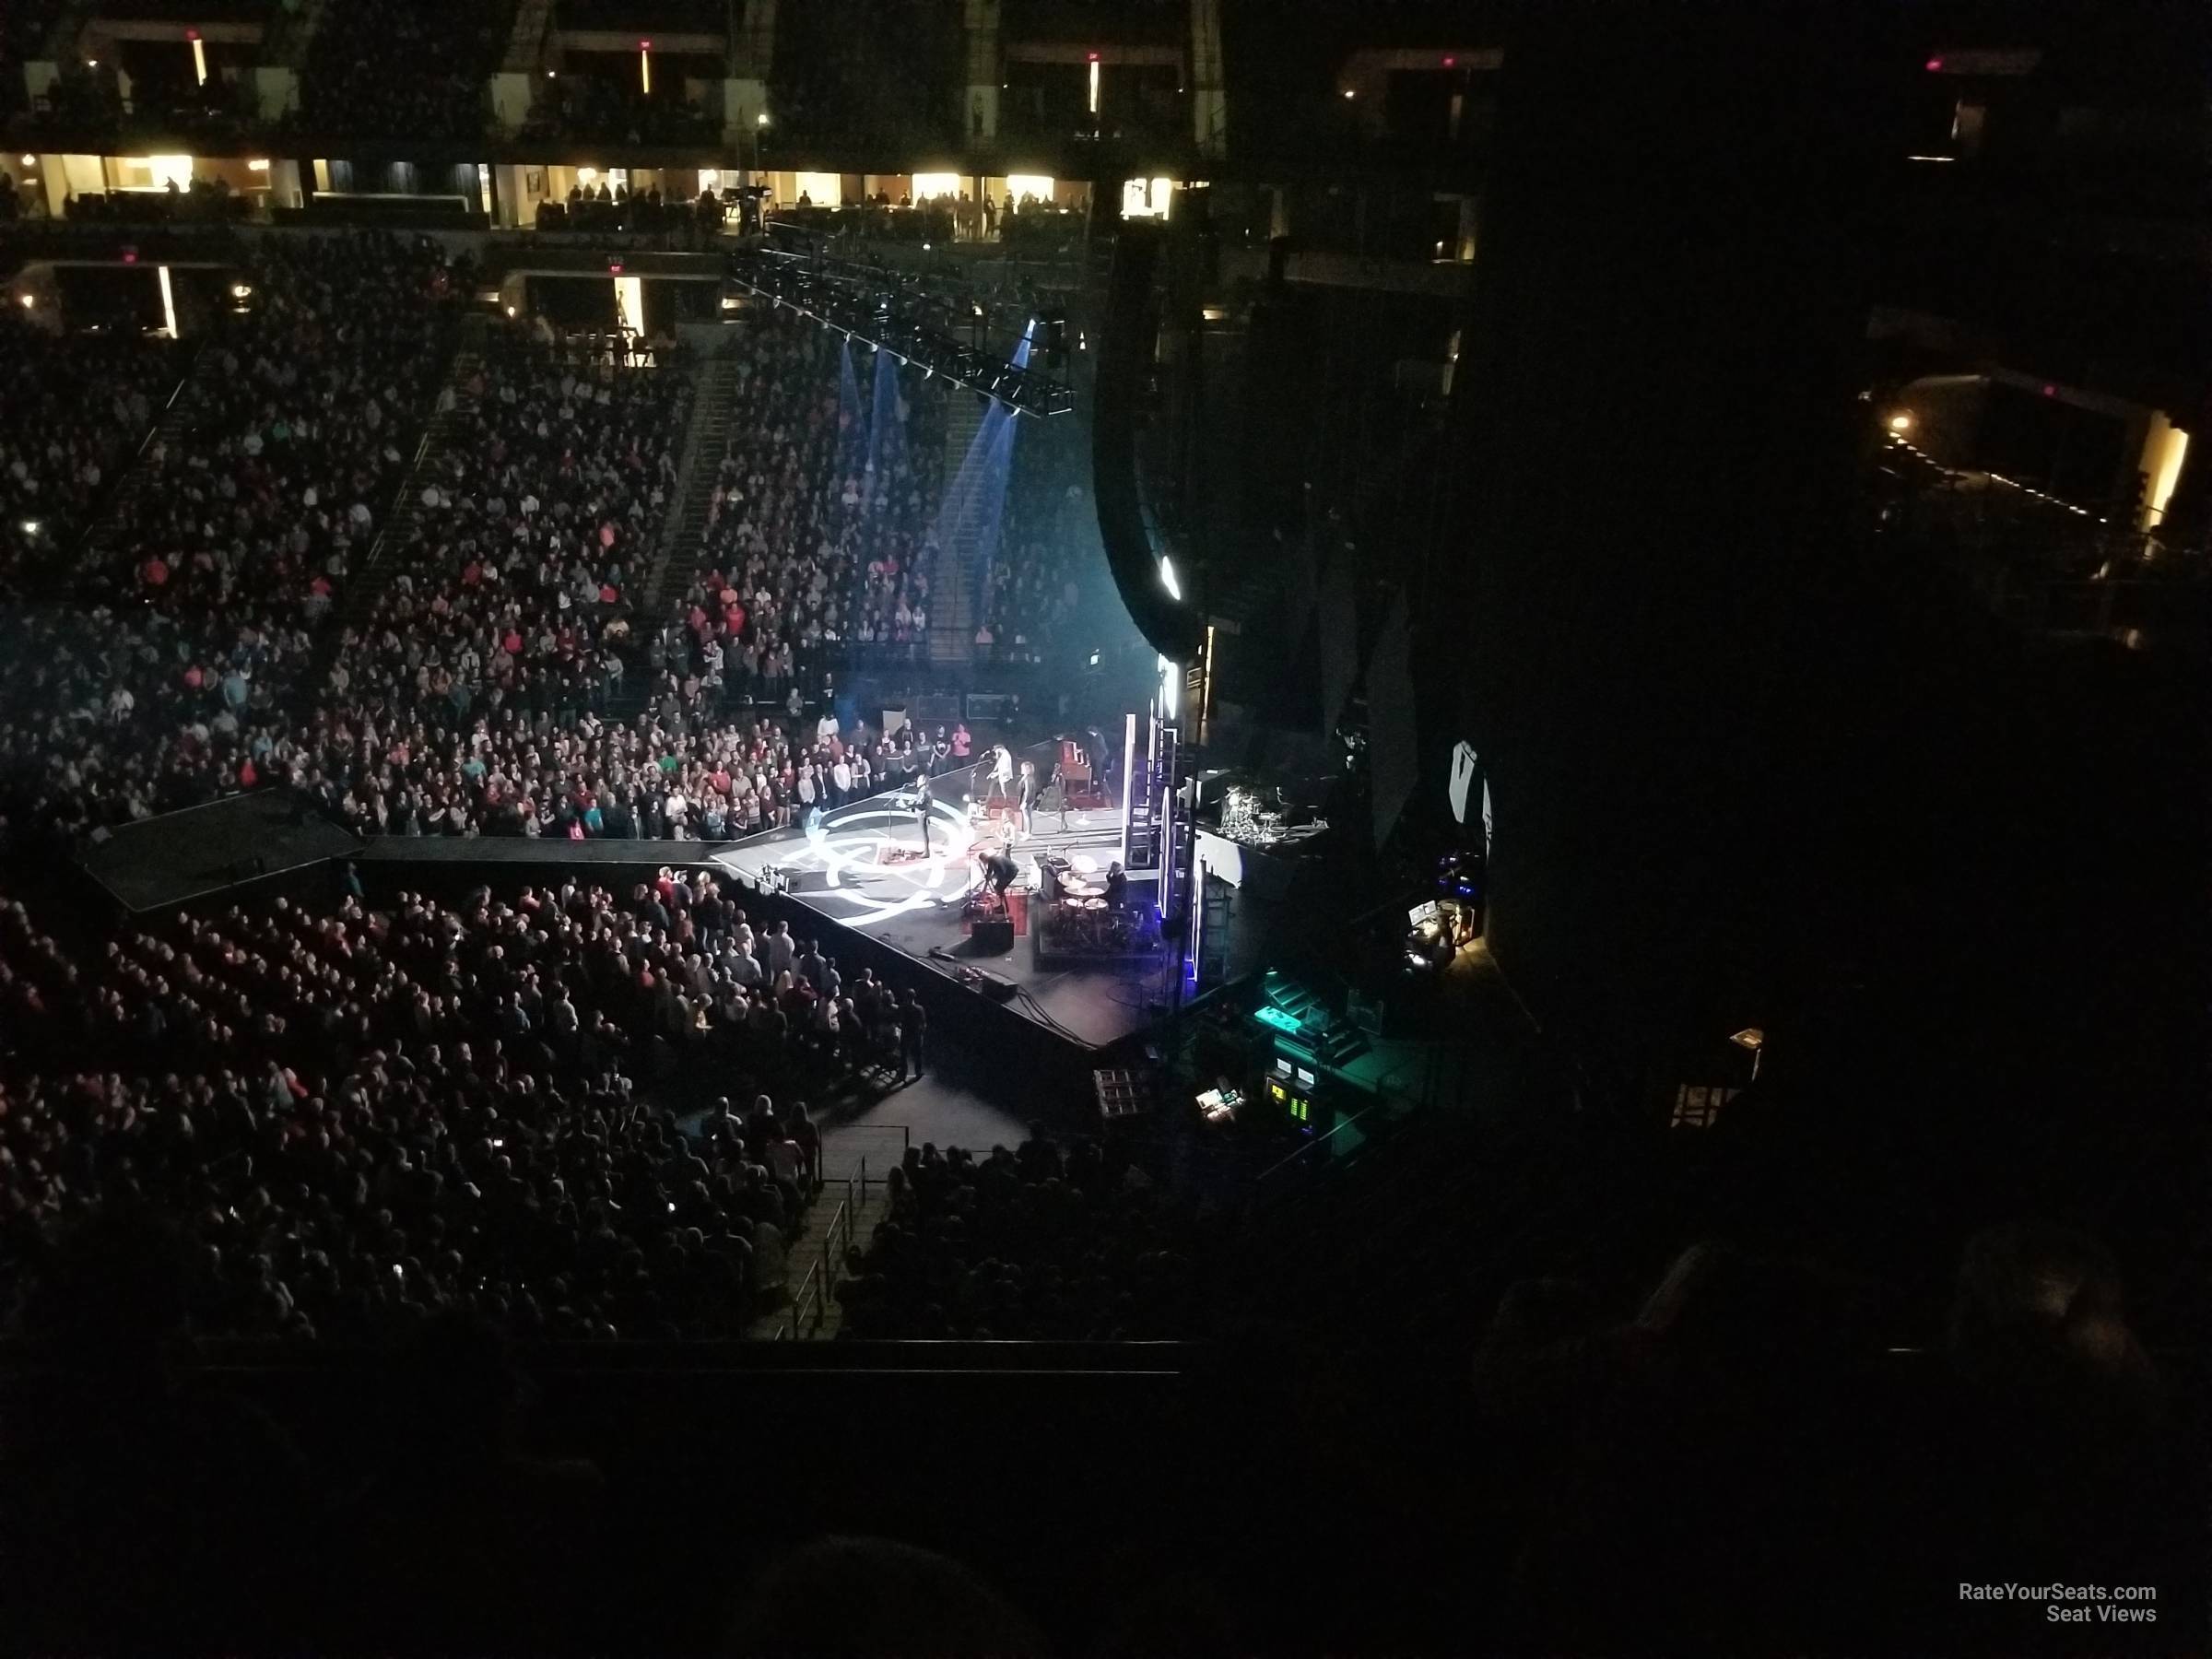 section 228, row c seat view  for concert - target center